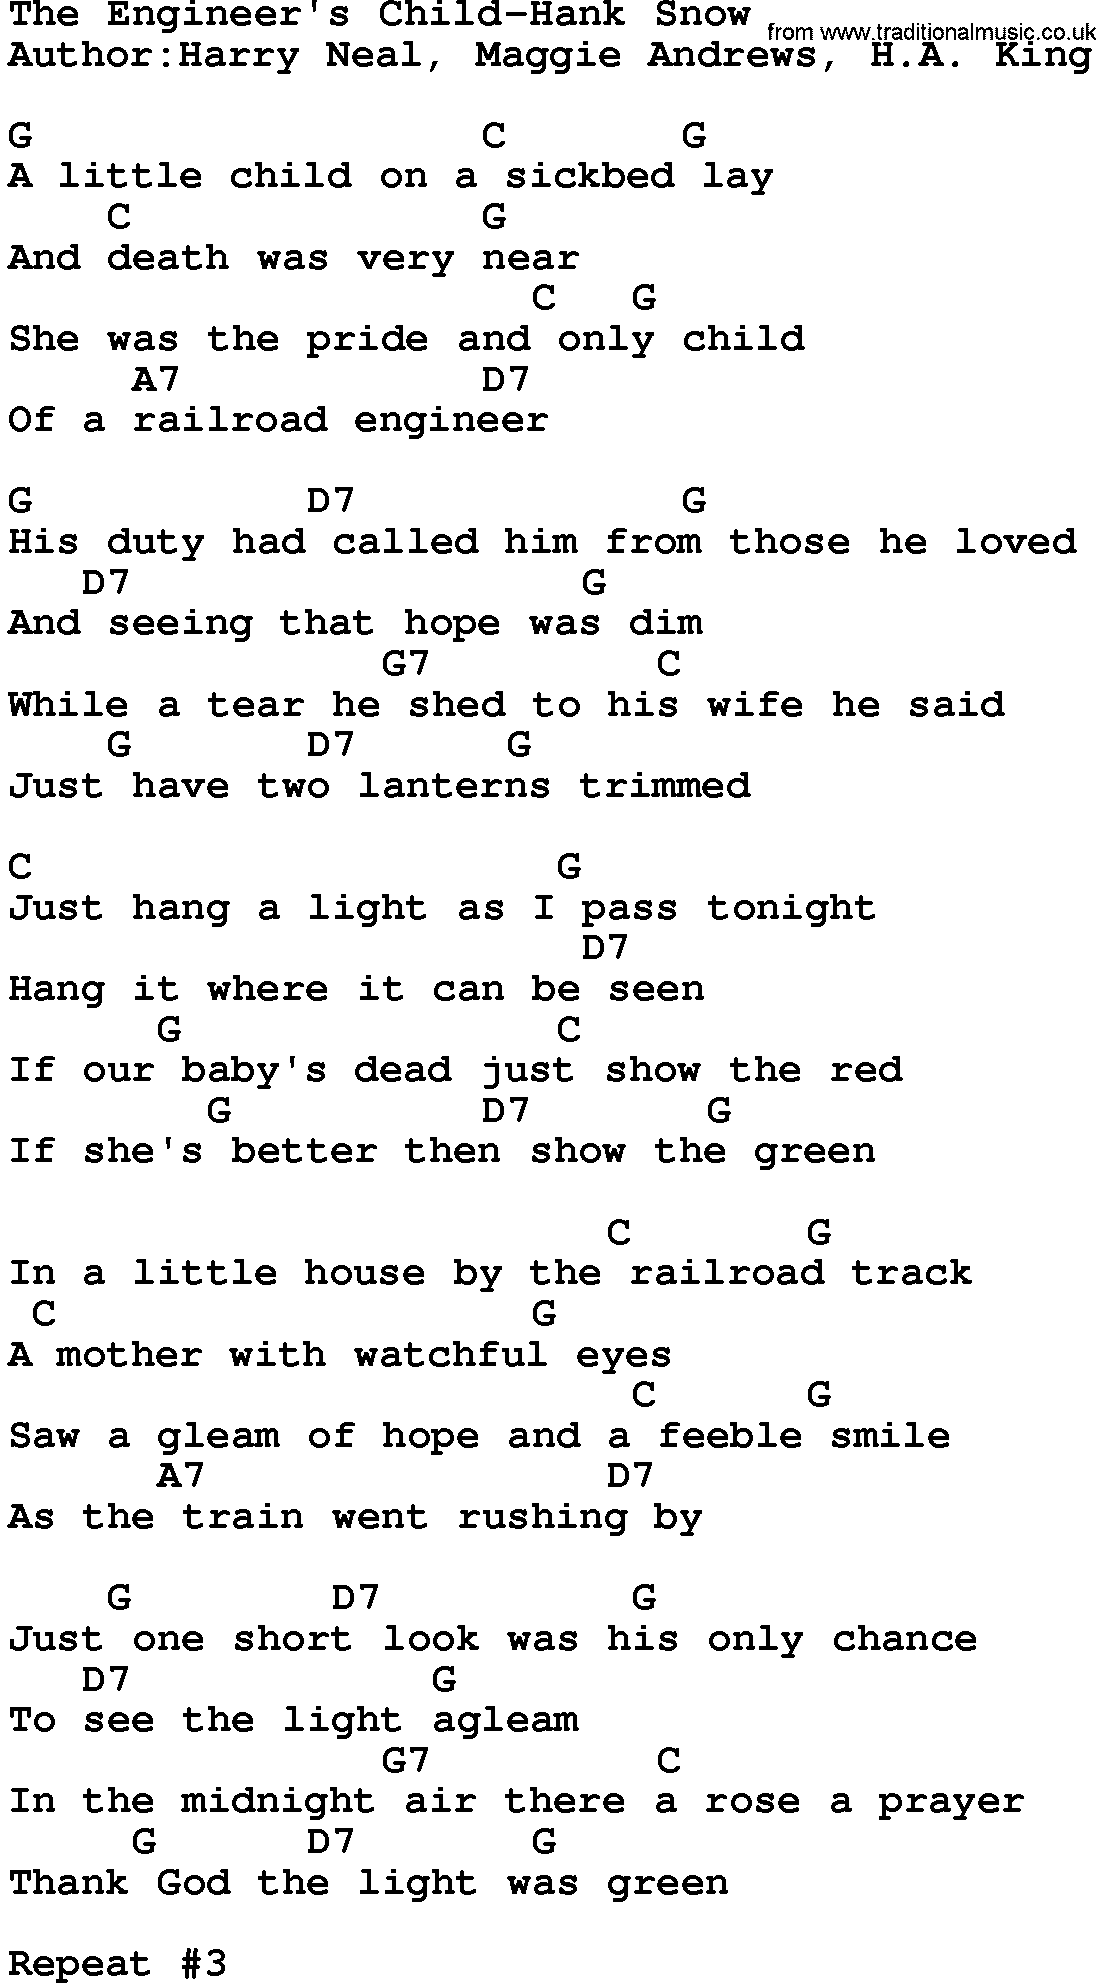 Country music song: The Engineer's Child-Hank Snow  lyrics and chords